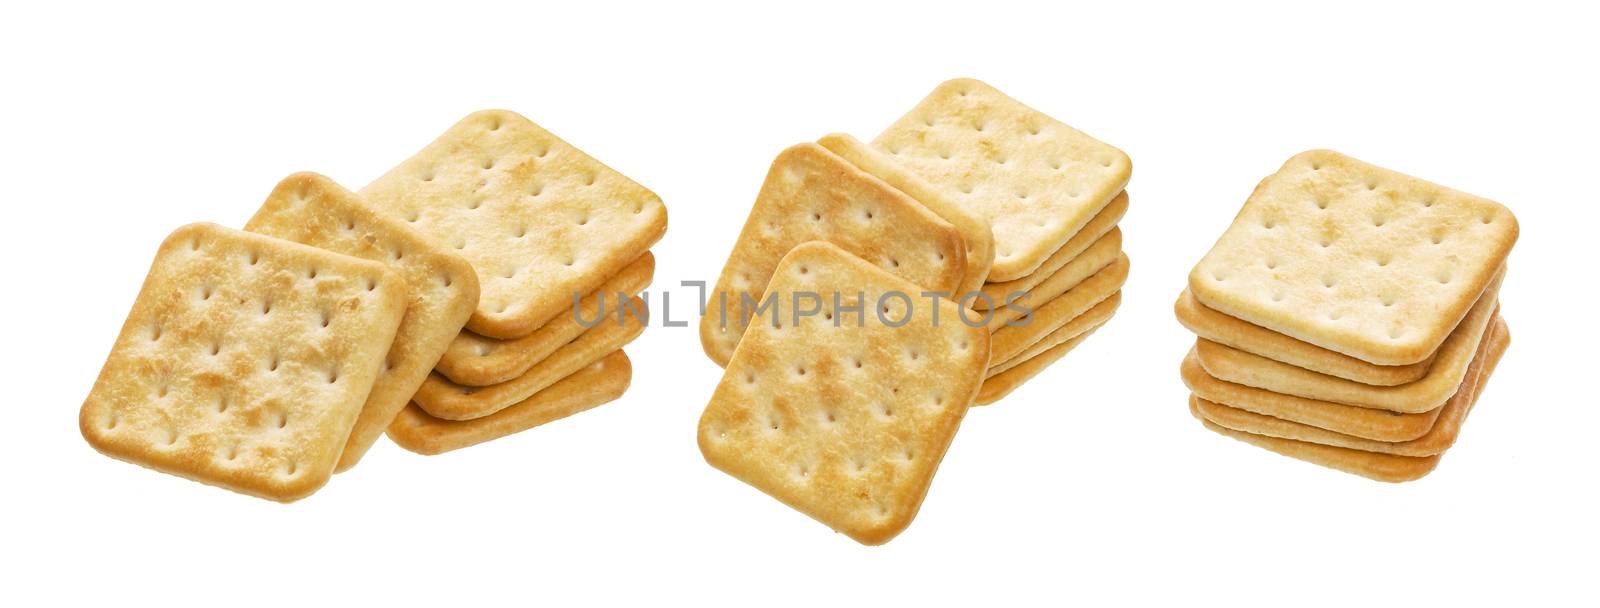 Stack of square crackers isolated on white background by xamtiw